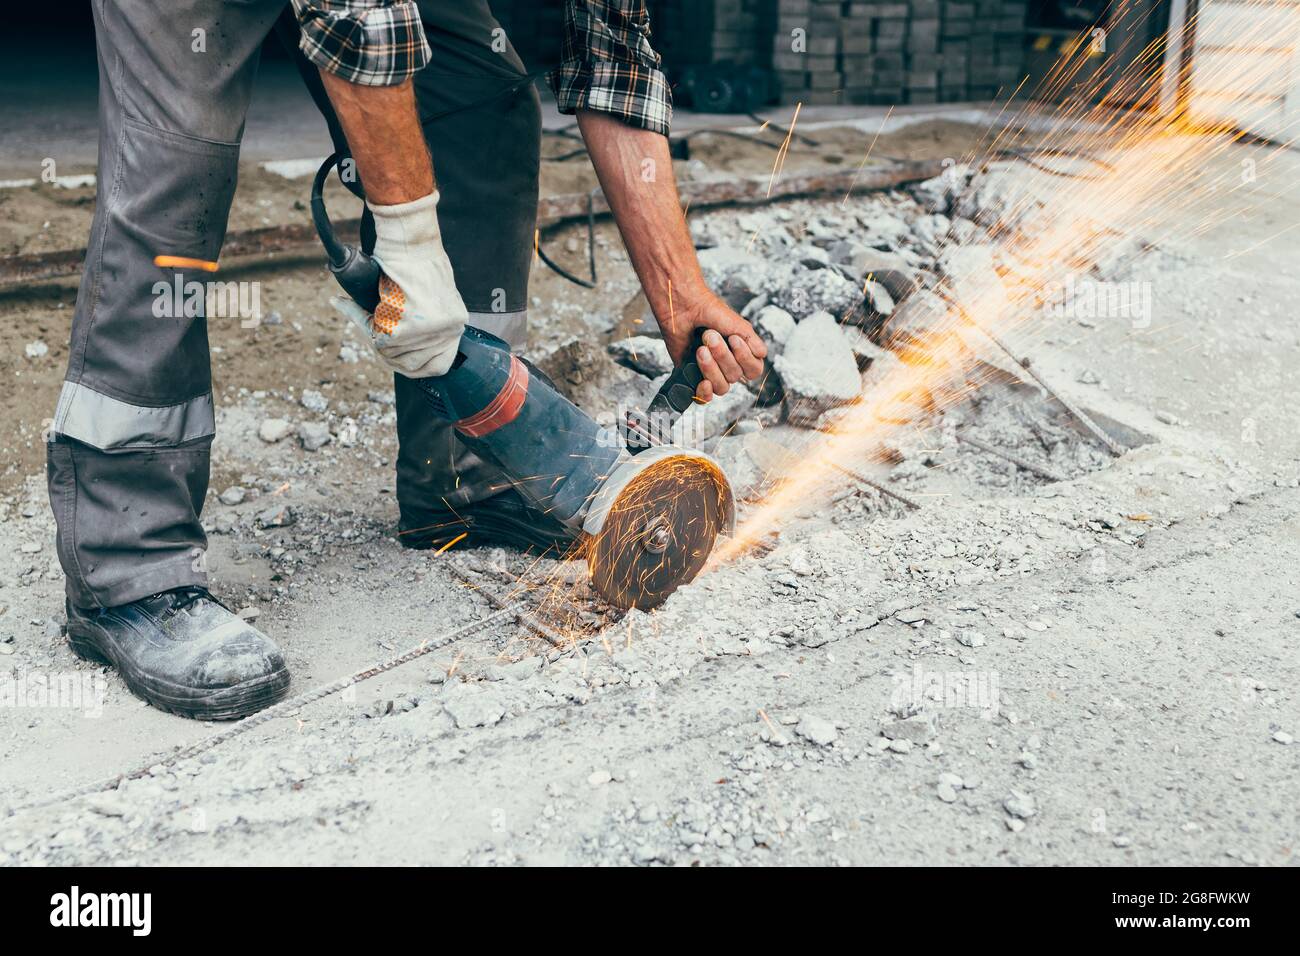 A worker with a grinder cuts the concrete pavement of the road and sparks fly. Construction and repair of the roadway. Stock Photo